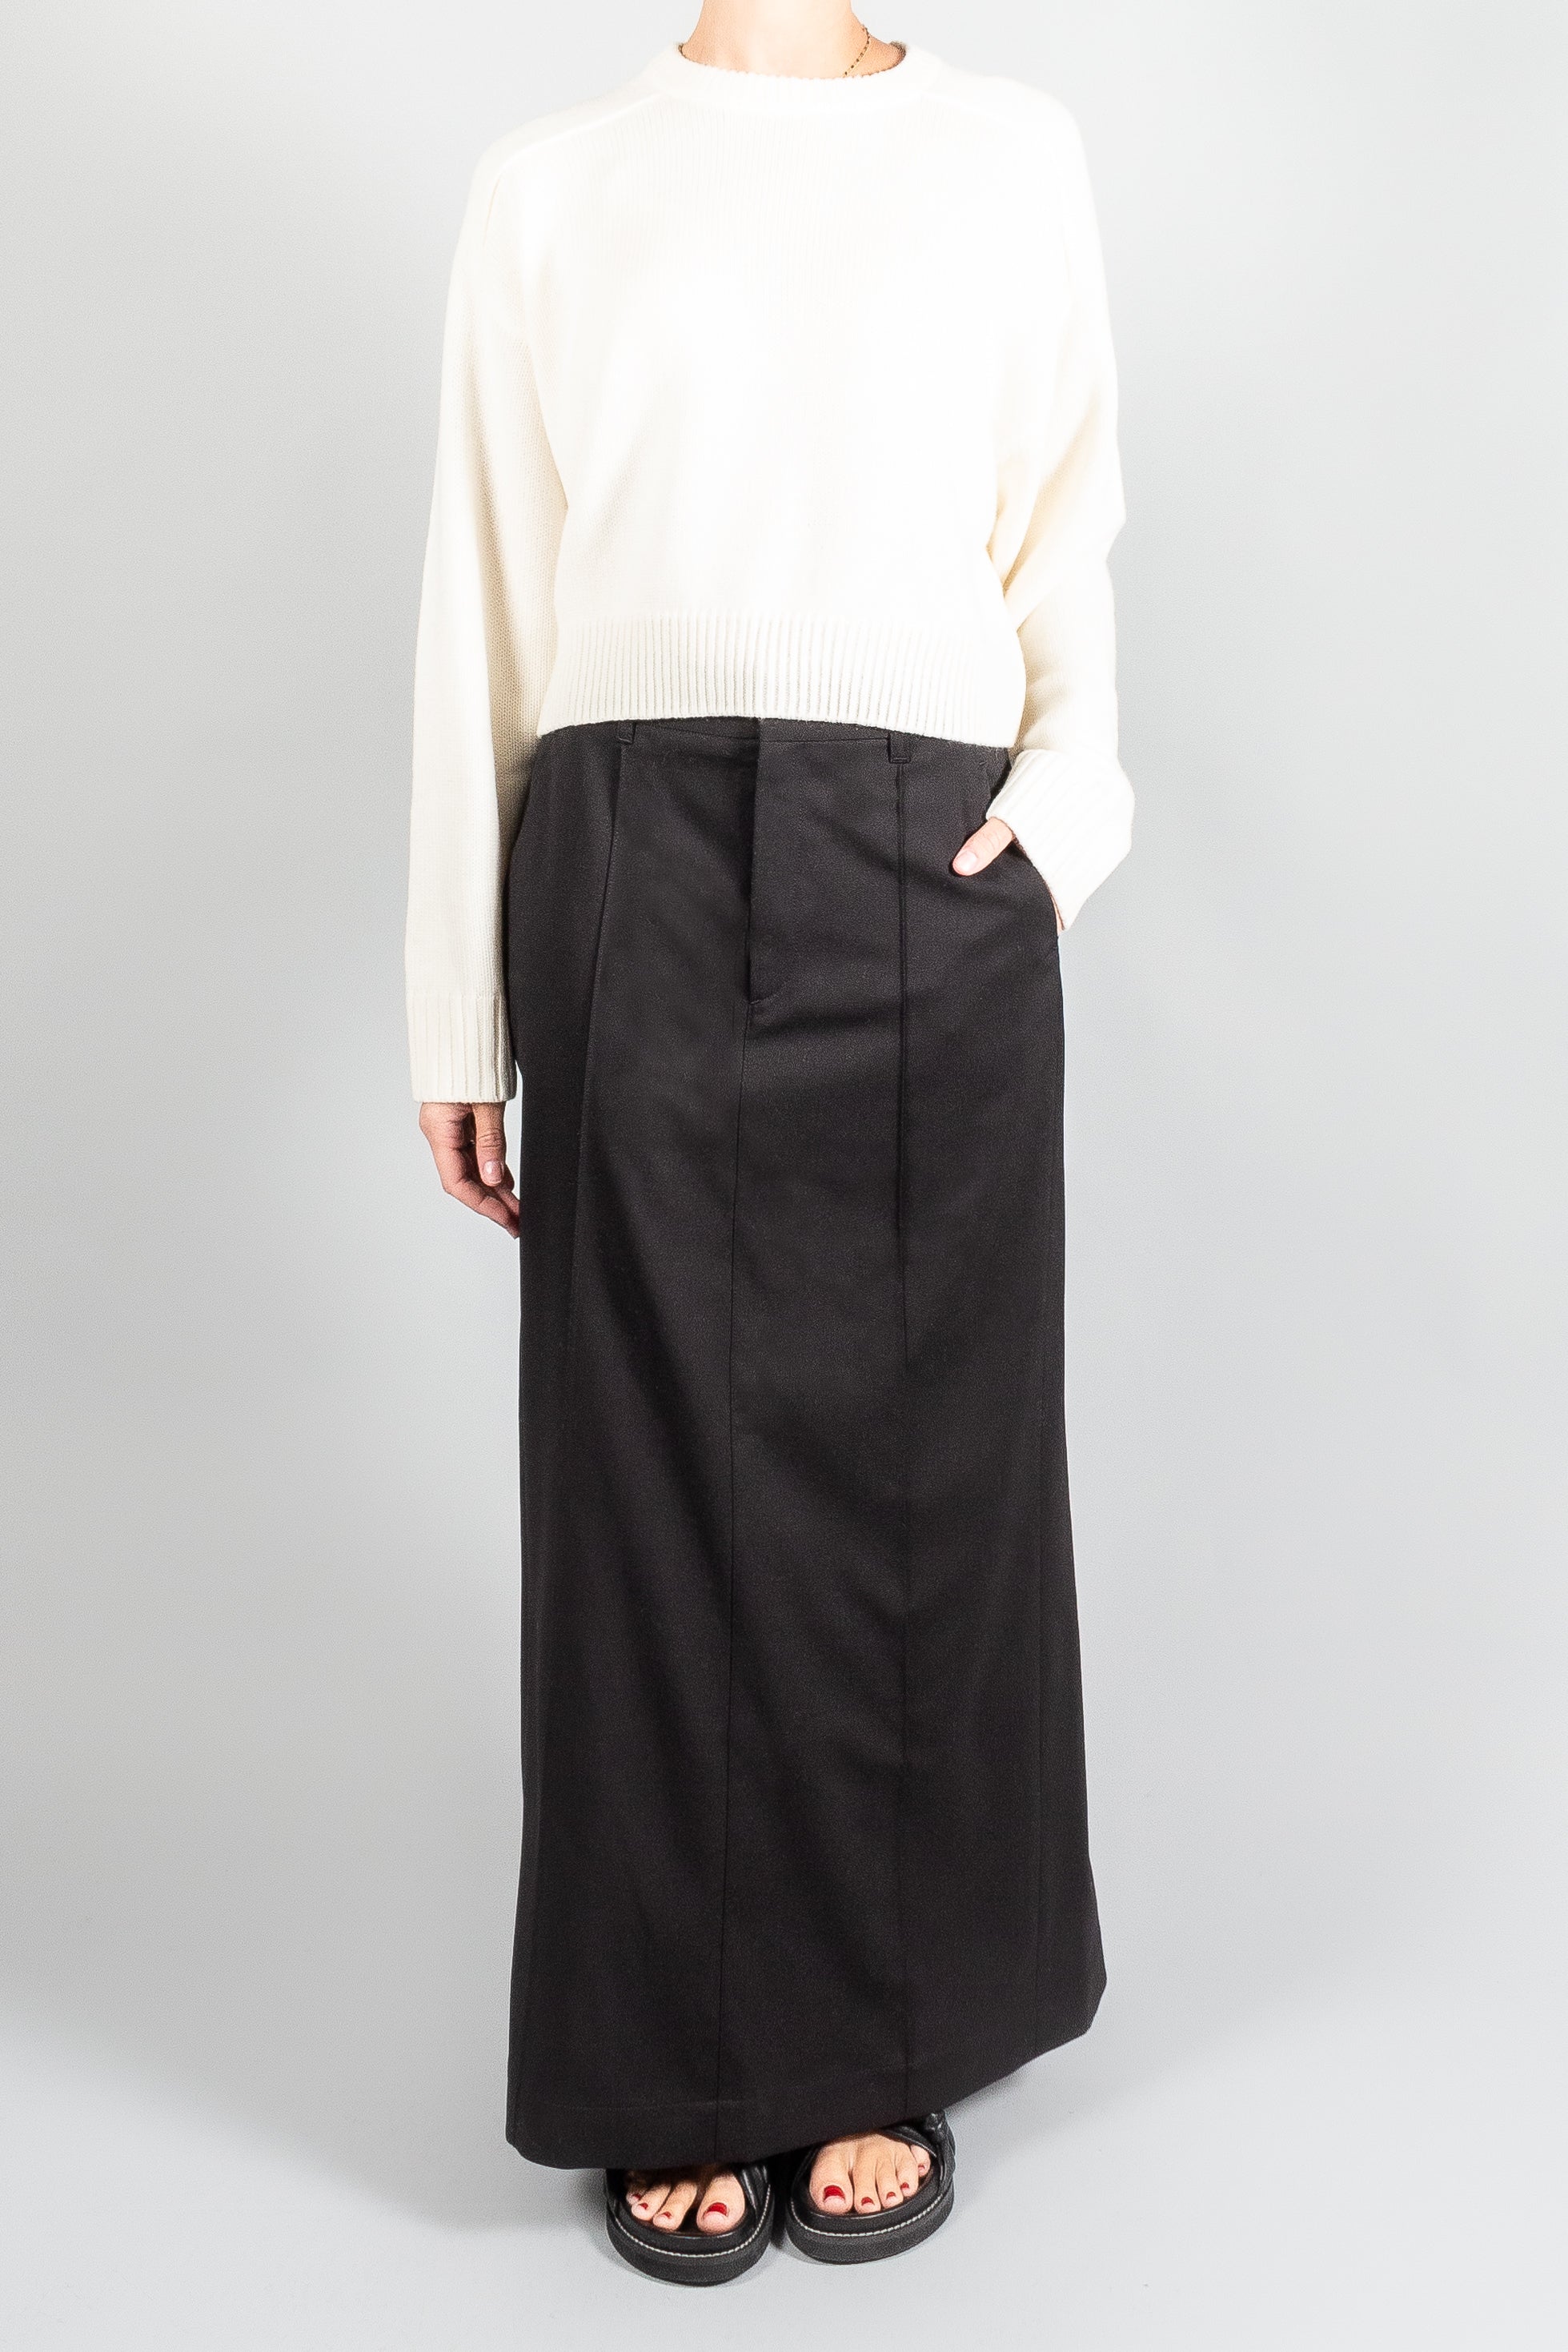 Maria Mcmanus Full Length Skirt-Skirts-Misch-Vancouver-Canada